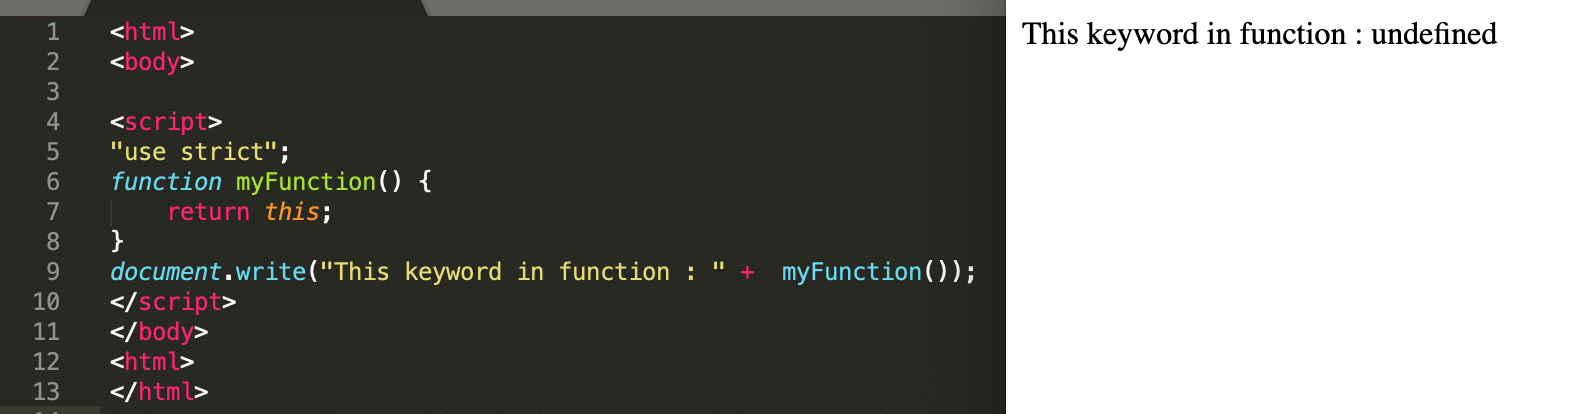  using strict mode in a function